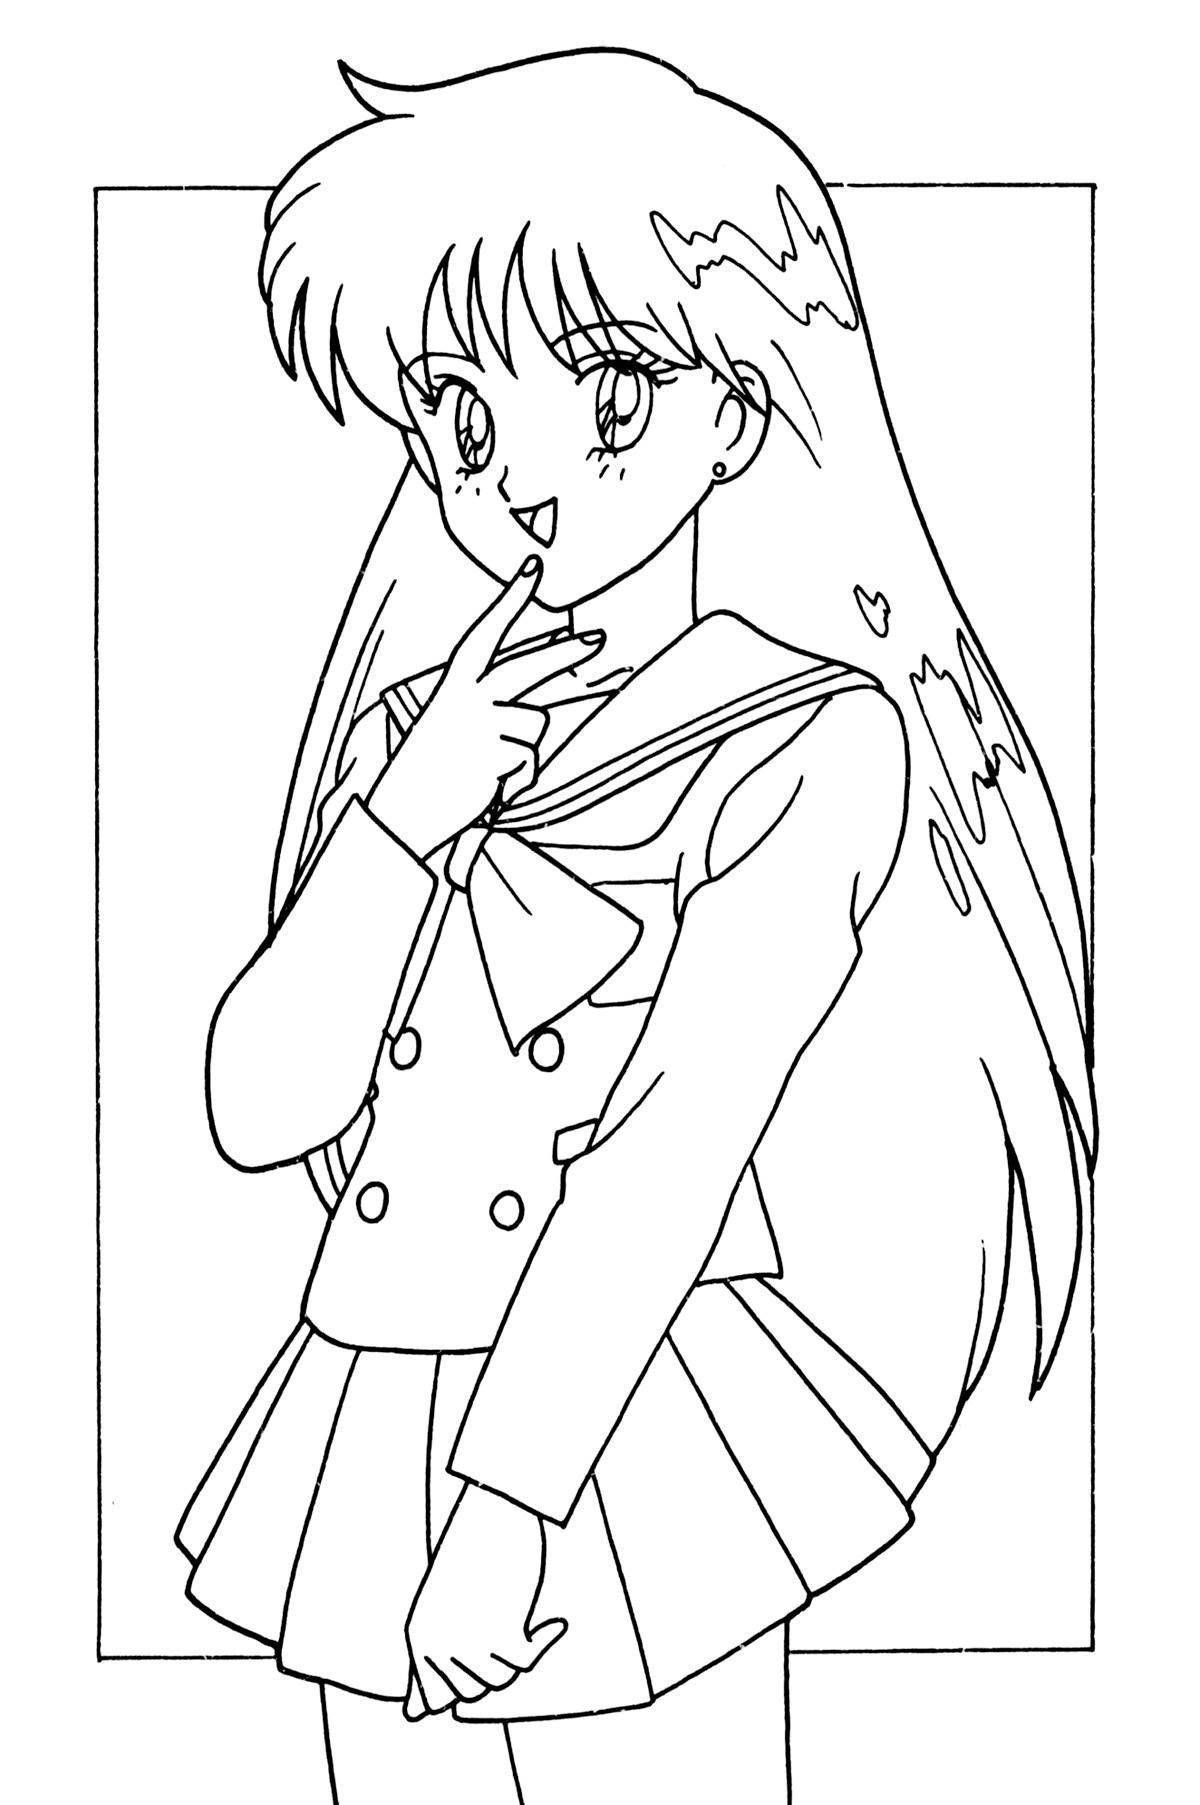 Delightful anime coloring book for girls 10 years old